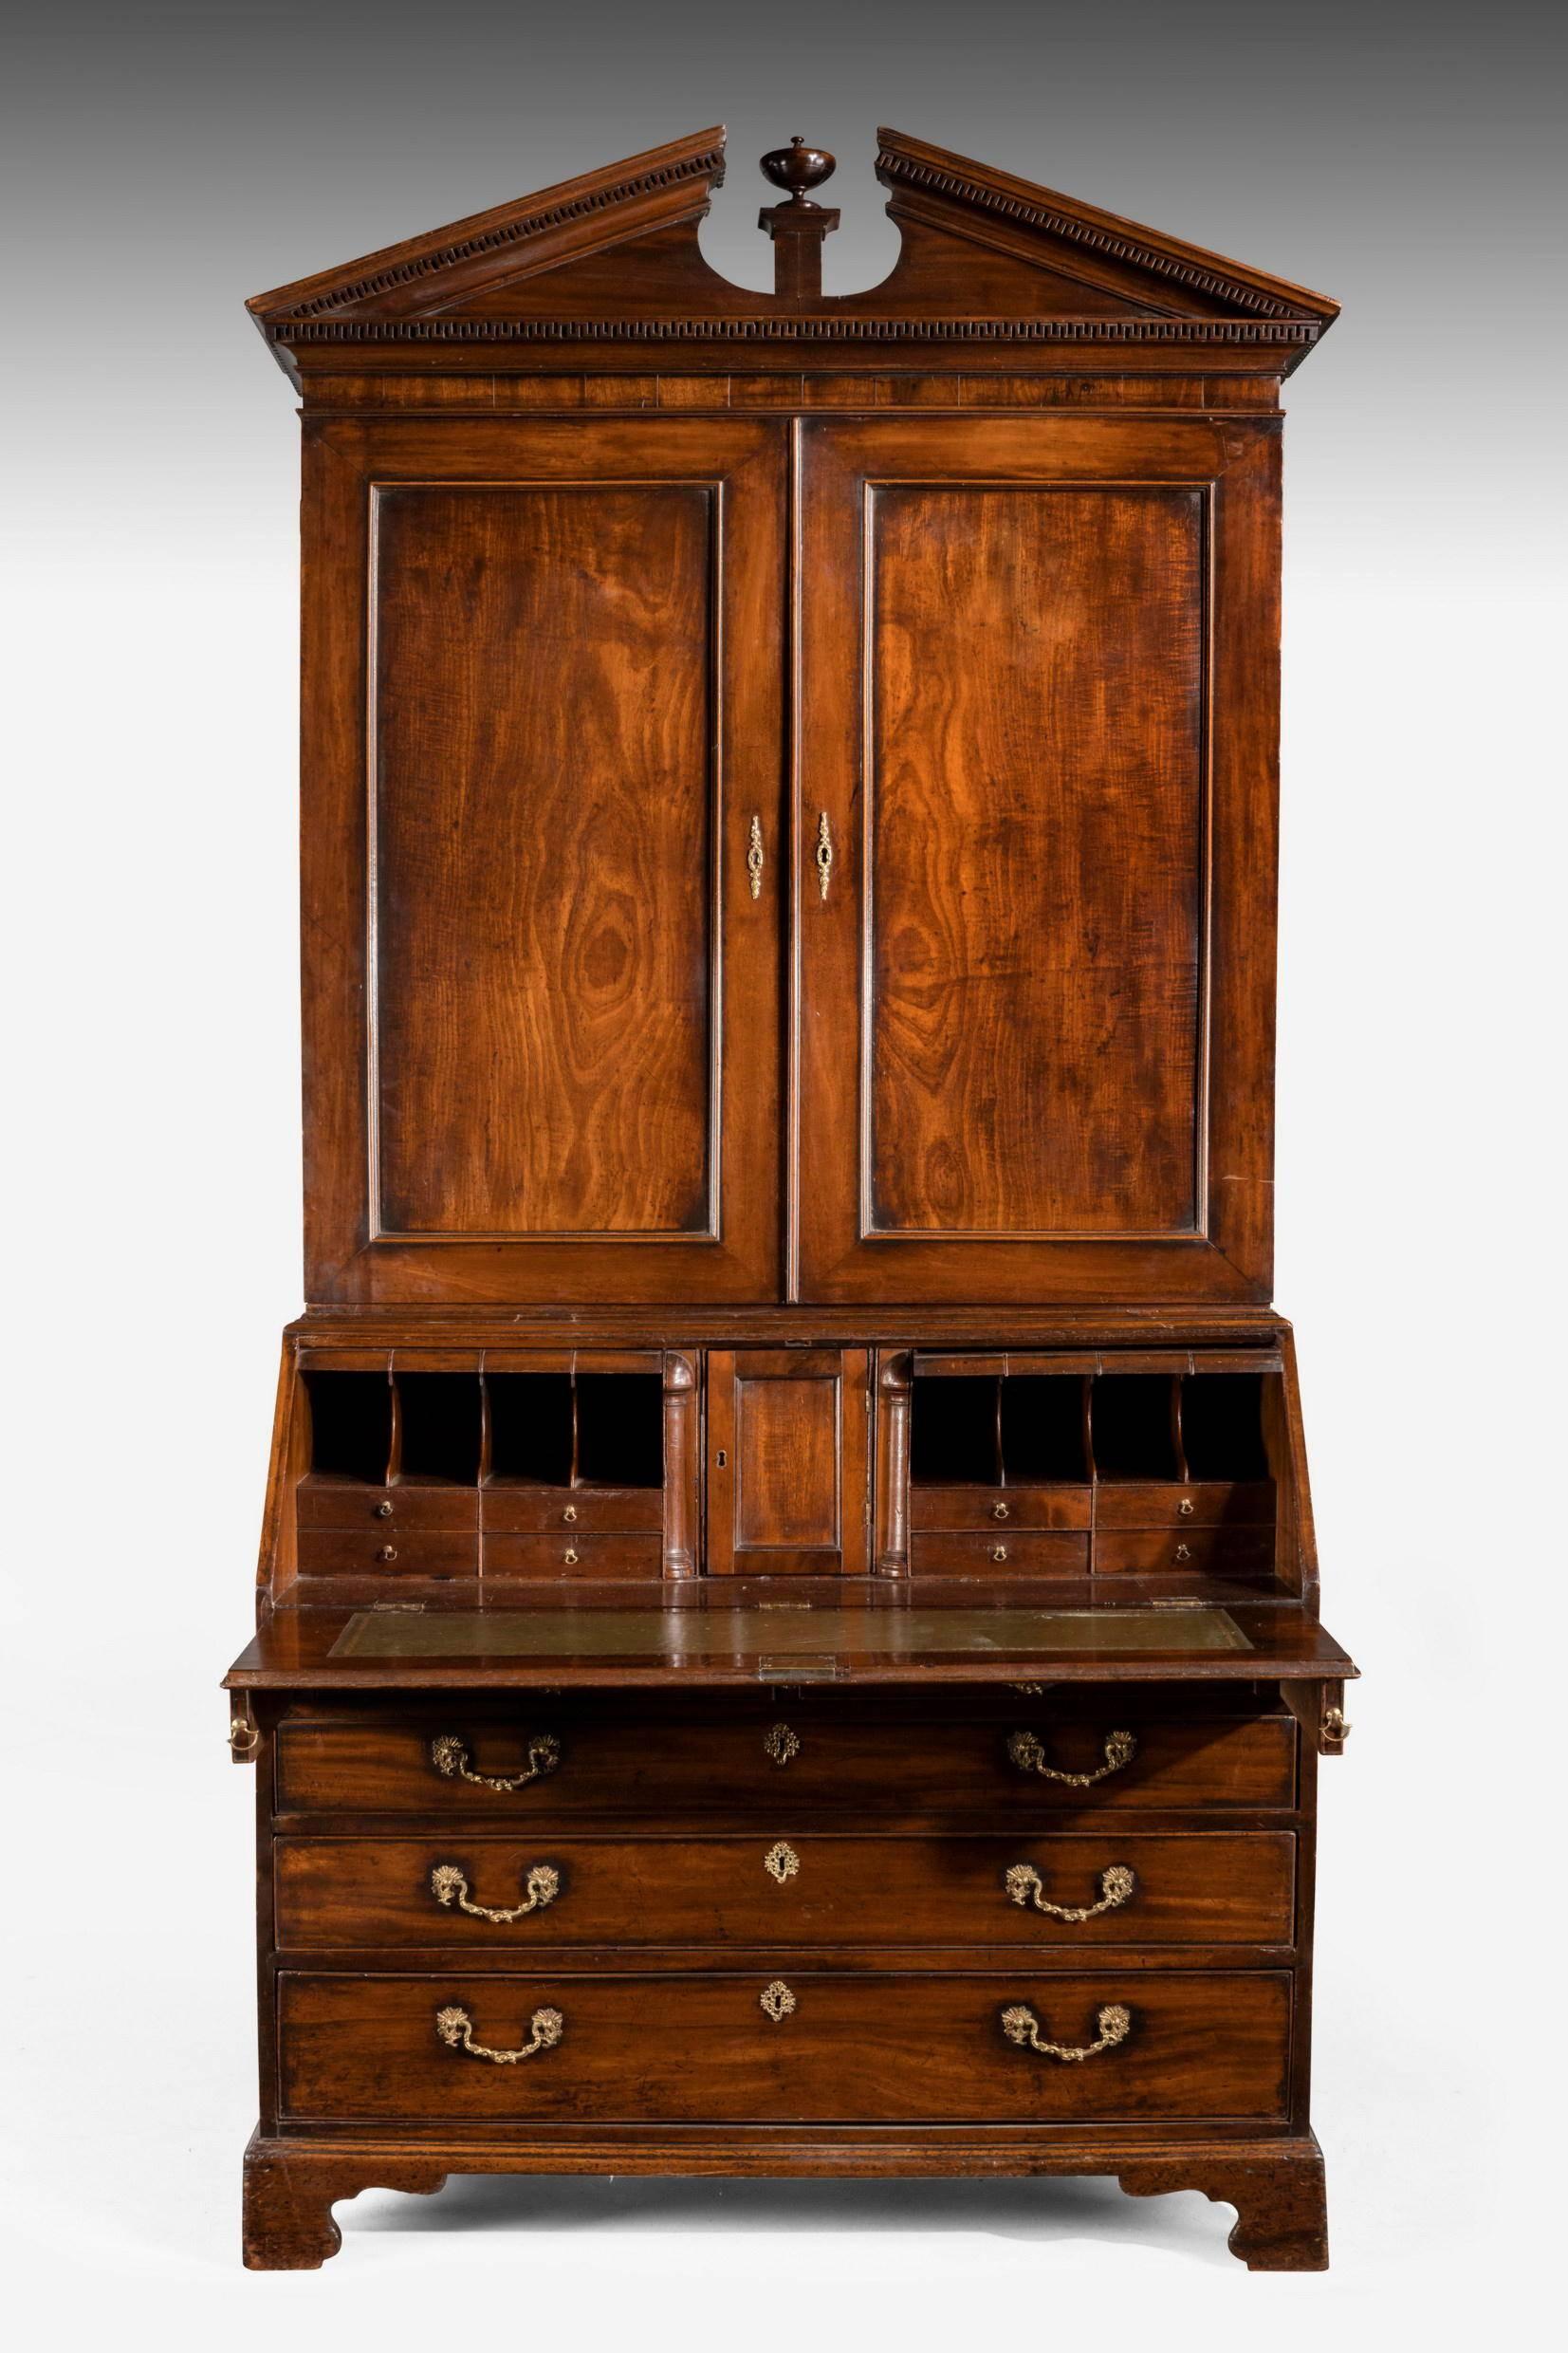 A fine quality and architecturally strong mahogany bureau bookcase. The interior with secret drawers involved in the friezes and complex construction. The top retaining the original broken arch pediment. Fine quality period gilt bronze handles